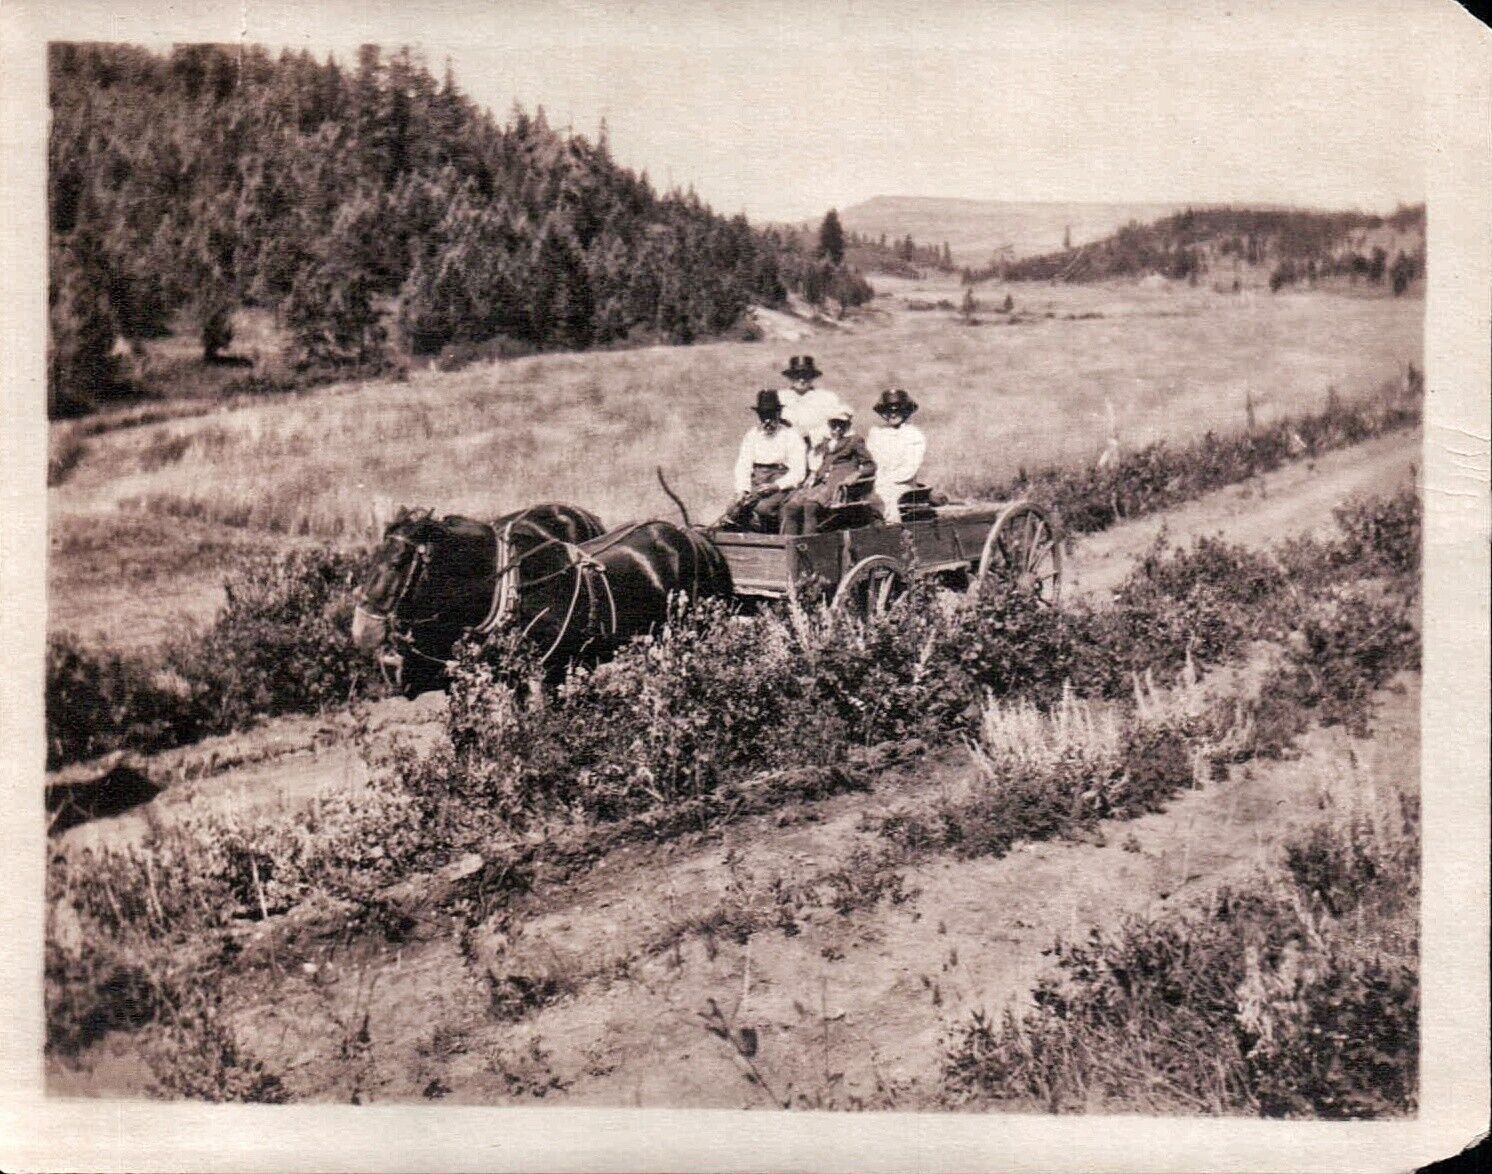 Vintage 1905 Old Photo of Family Traveling in Horses & Buggy Dirt Path Forest